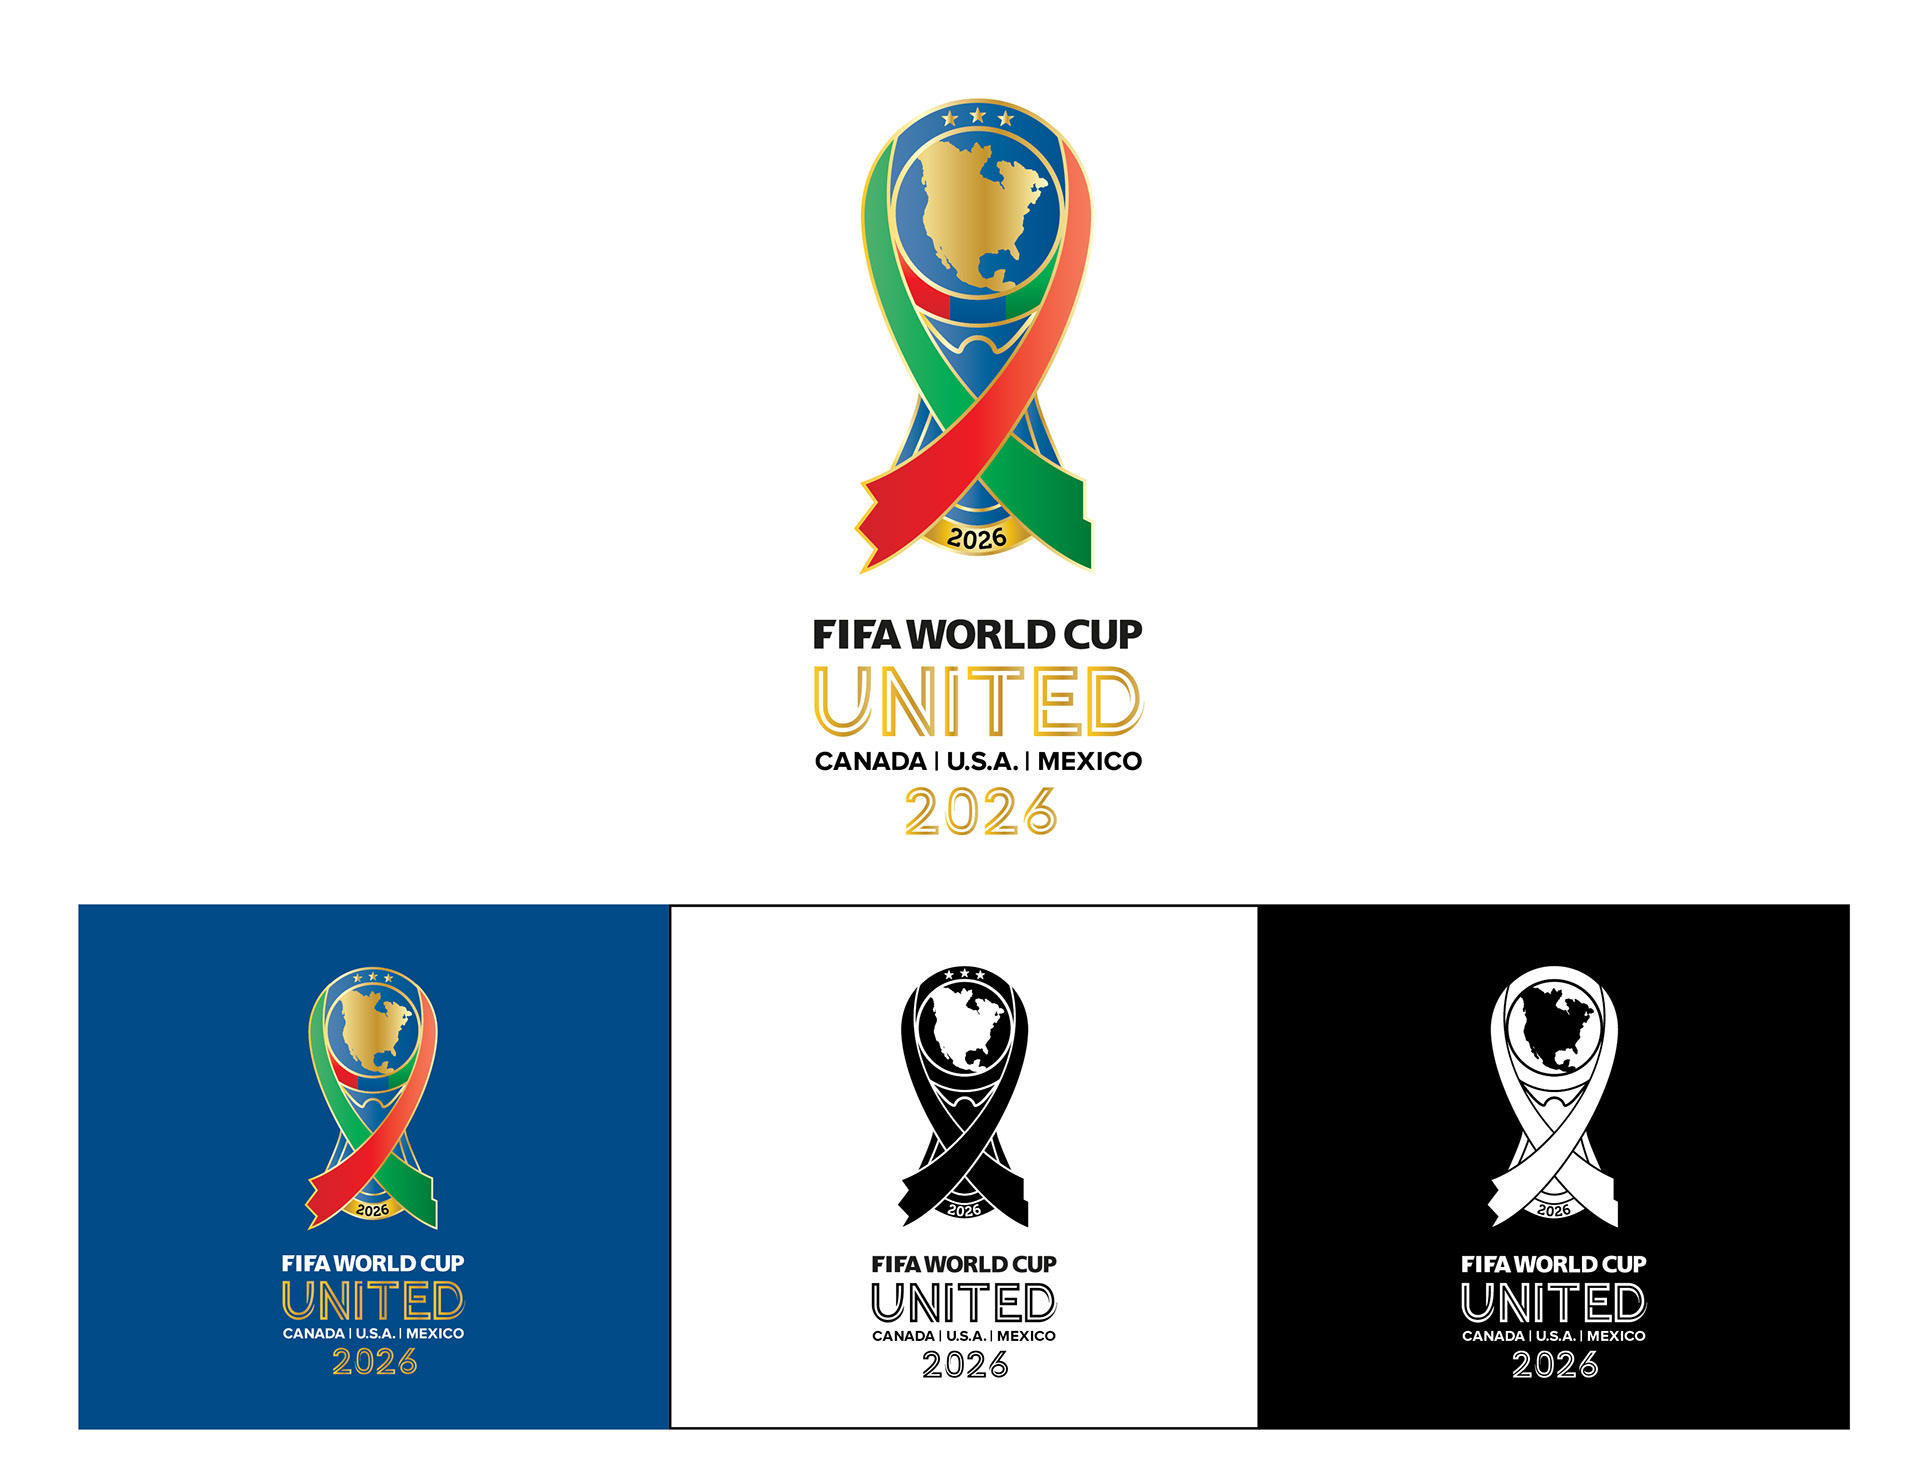 FIFA's 2026 World Cup logo is part of a confounding branding trend in